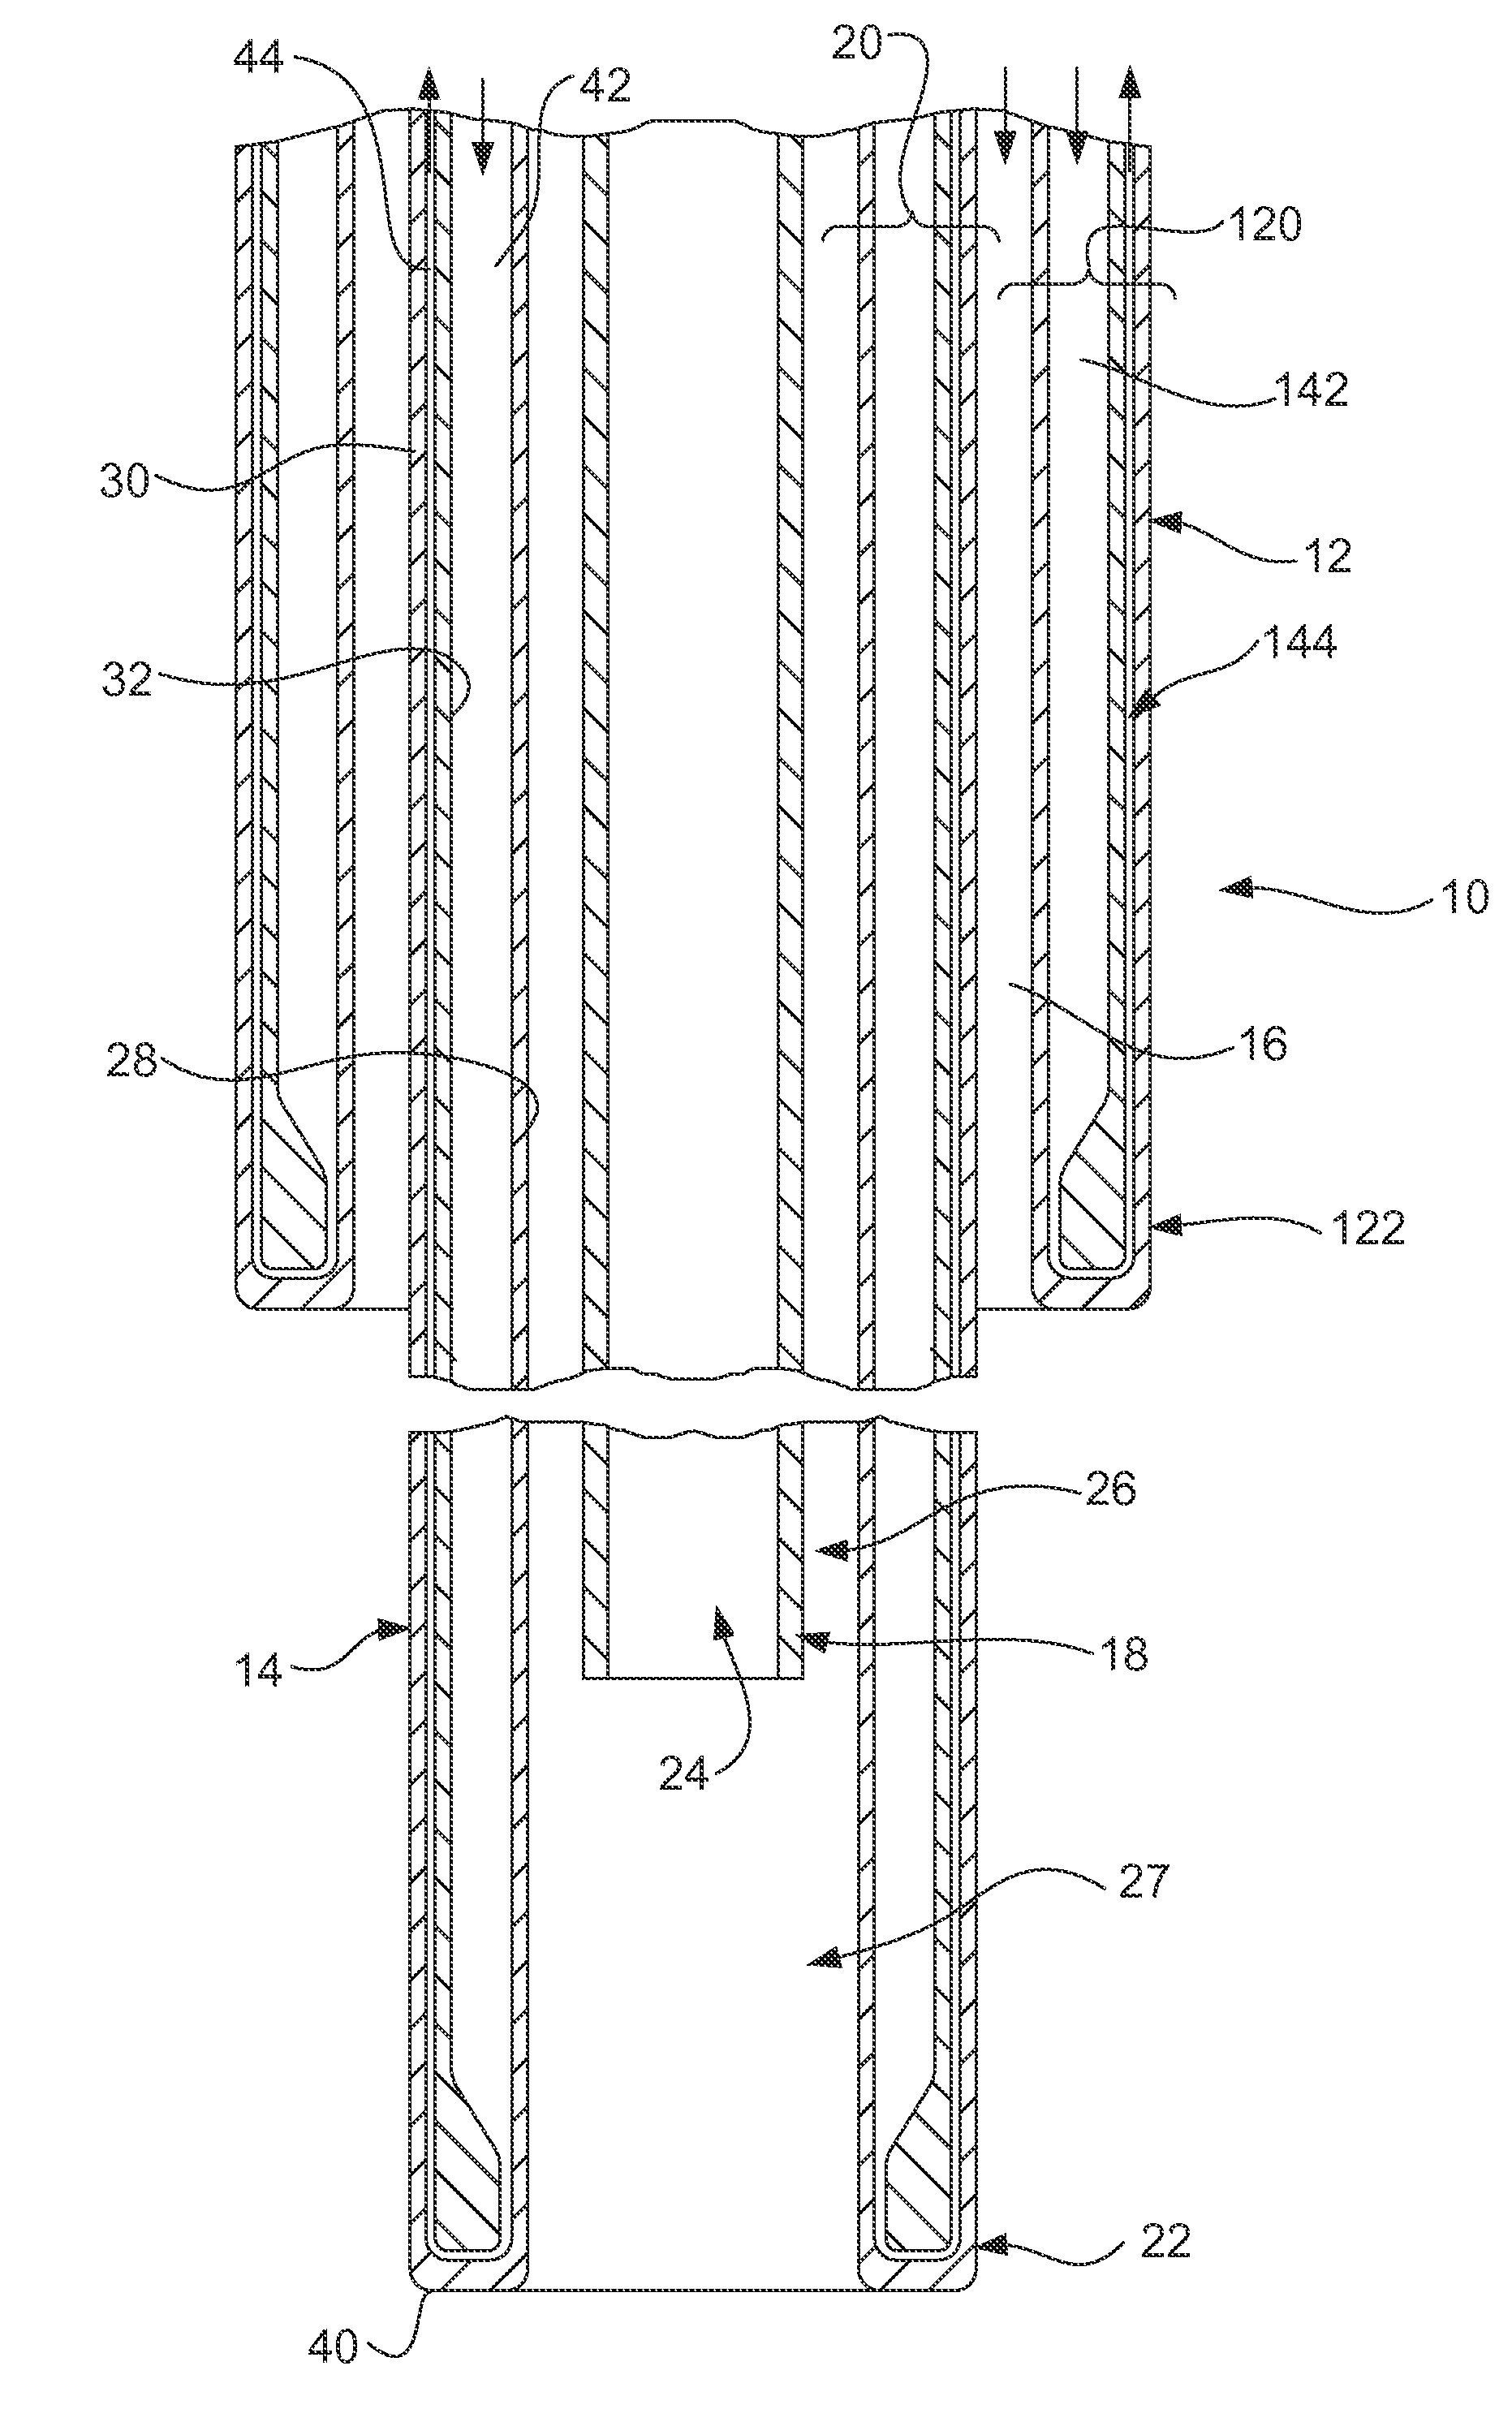 Fluid cooled lances for top submerged injection